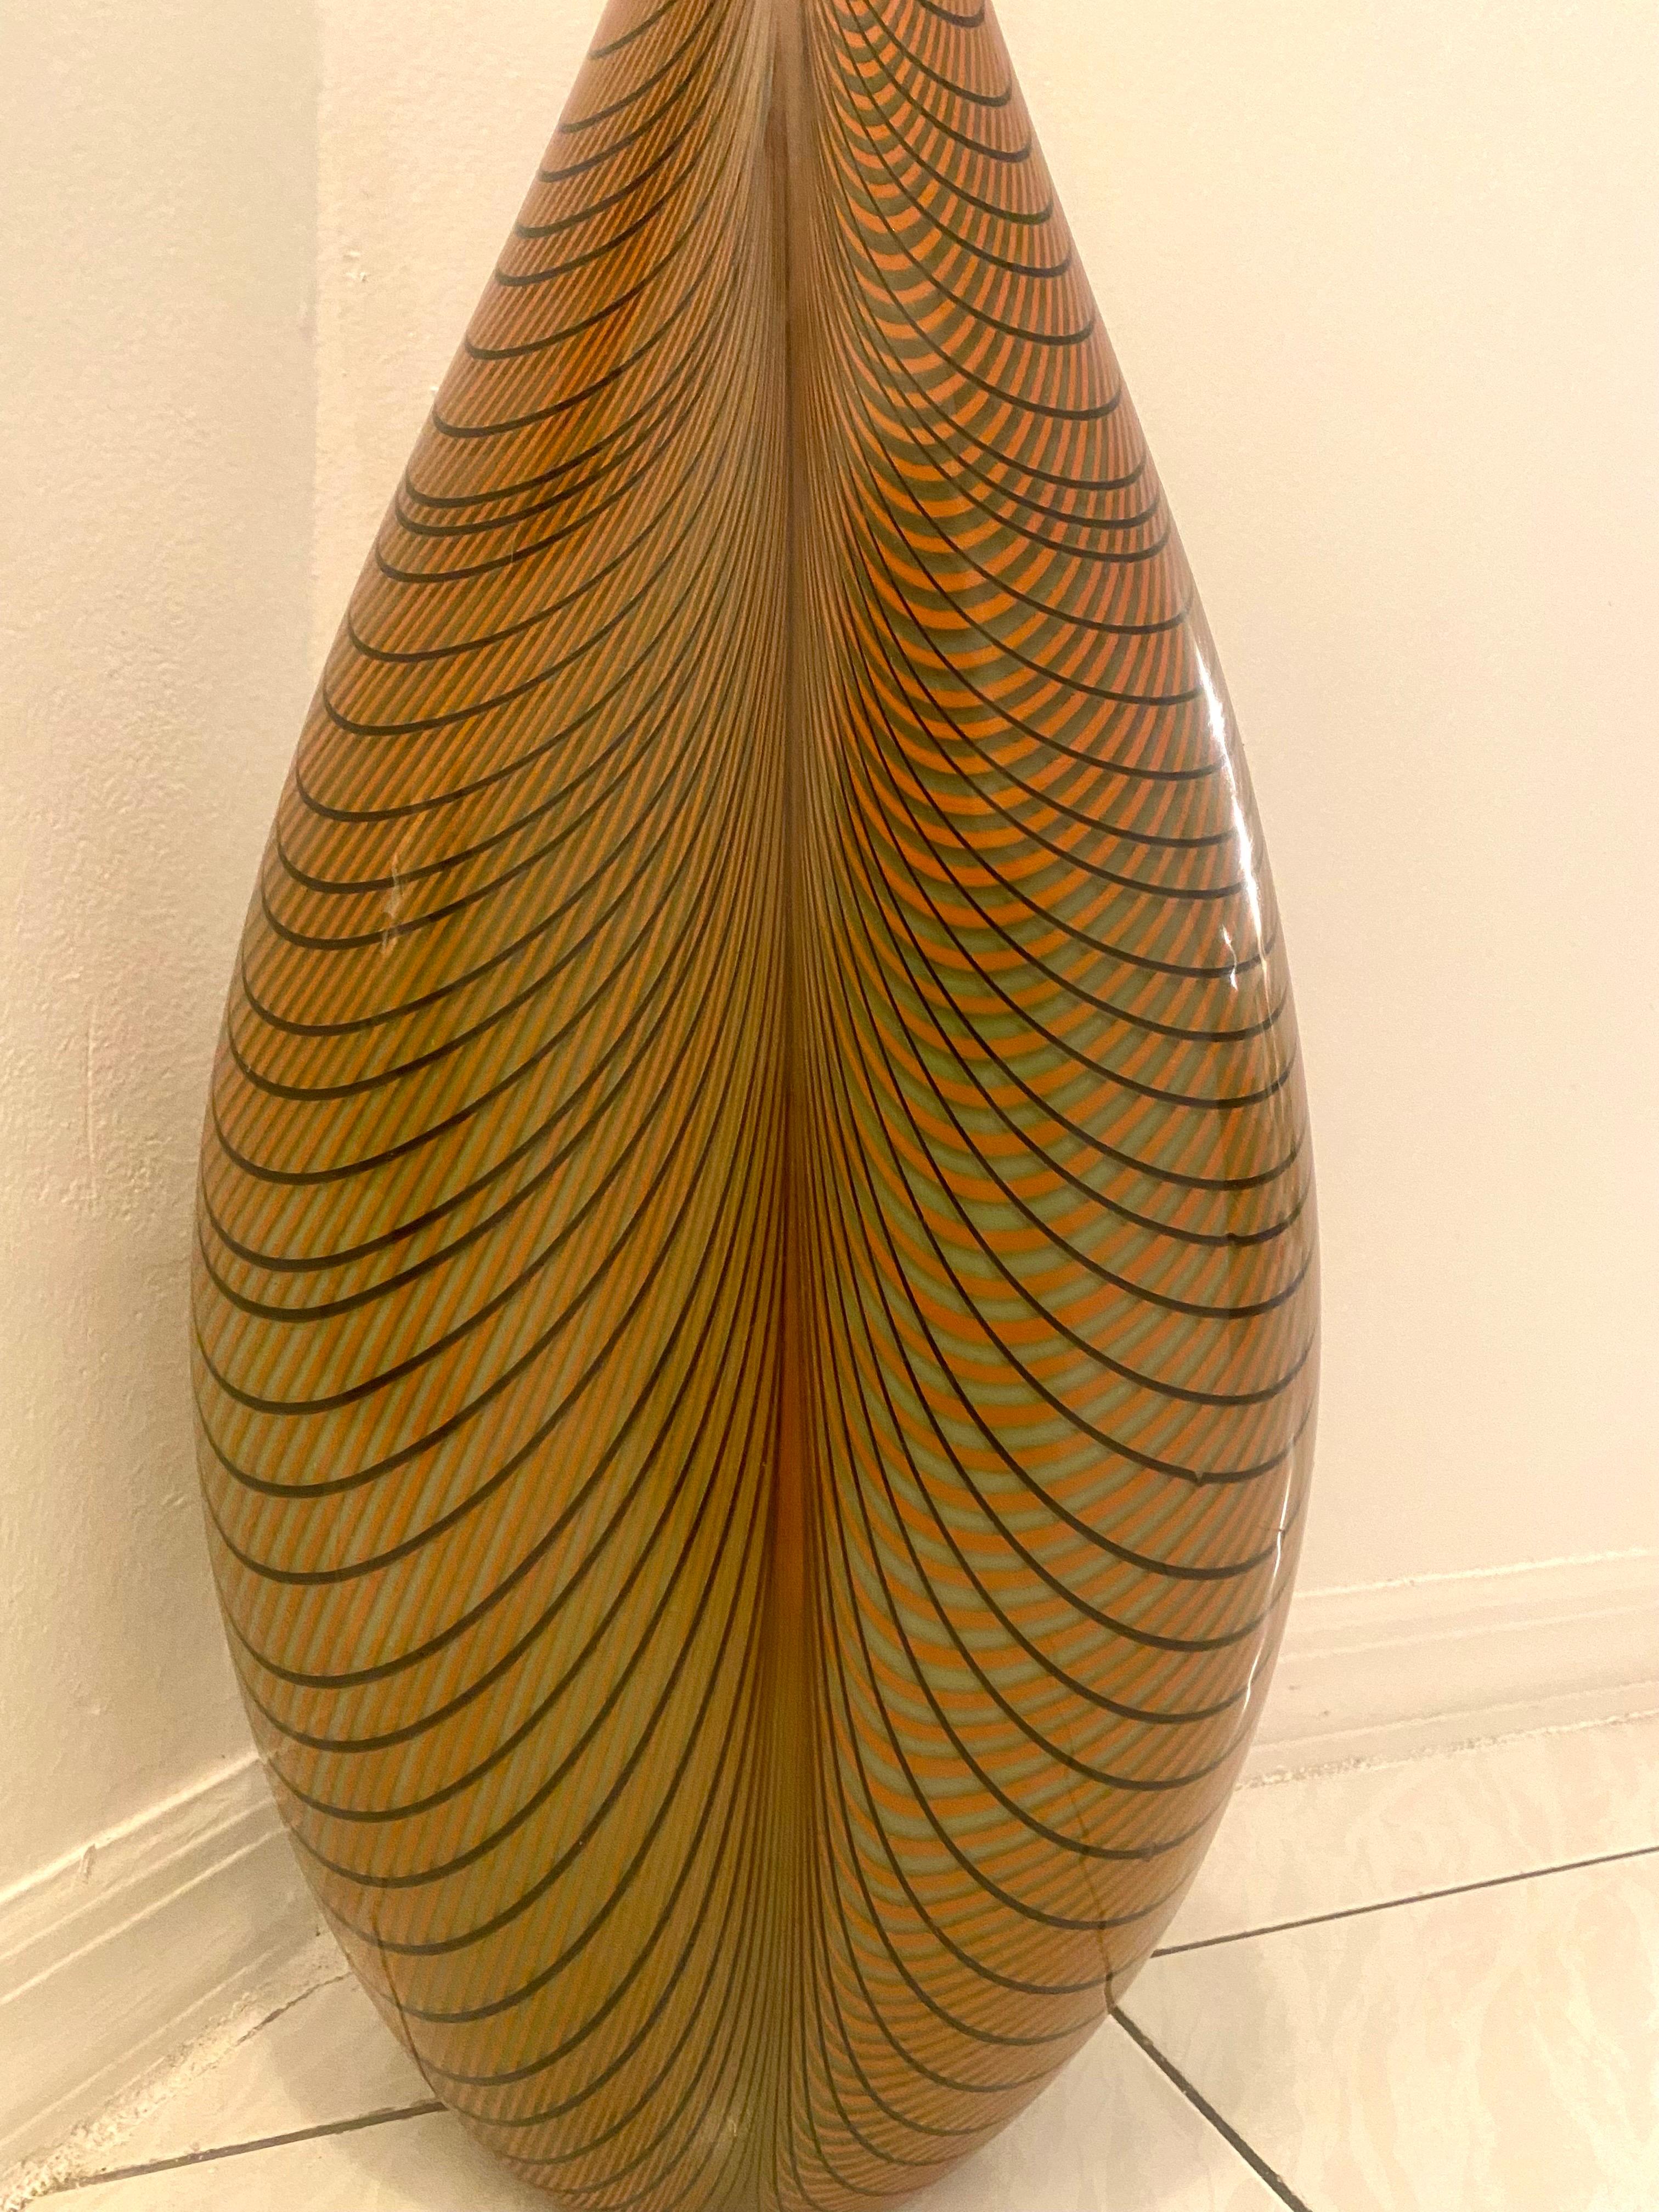 Alberto Dona Tall Feather Murano Glass Vase, Signed For Sale 7